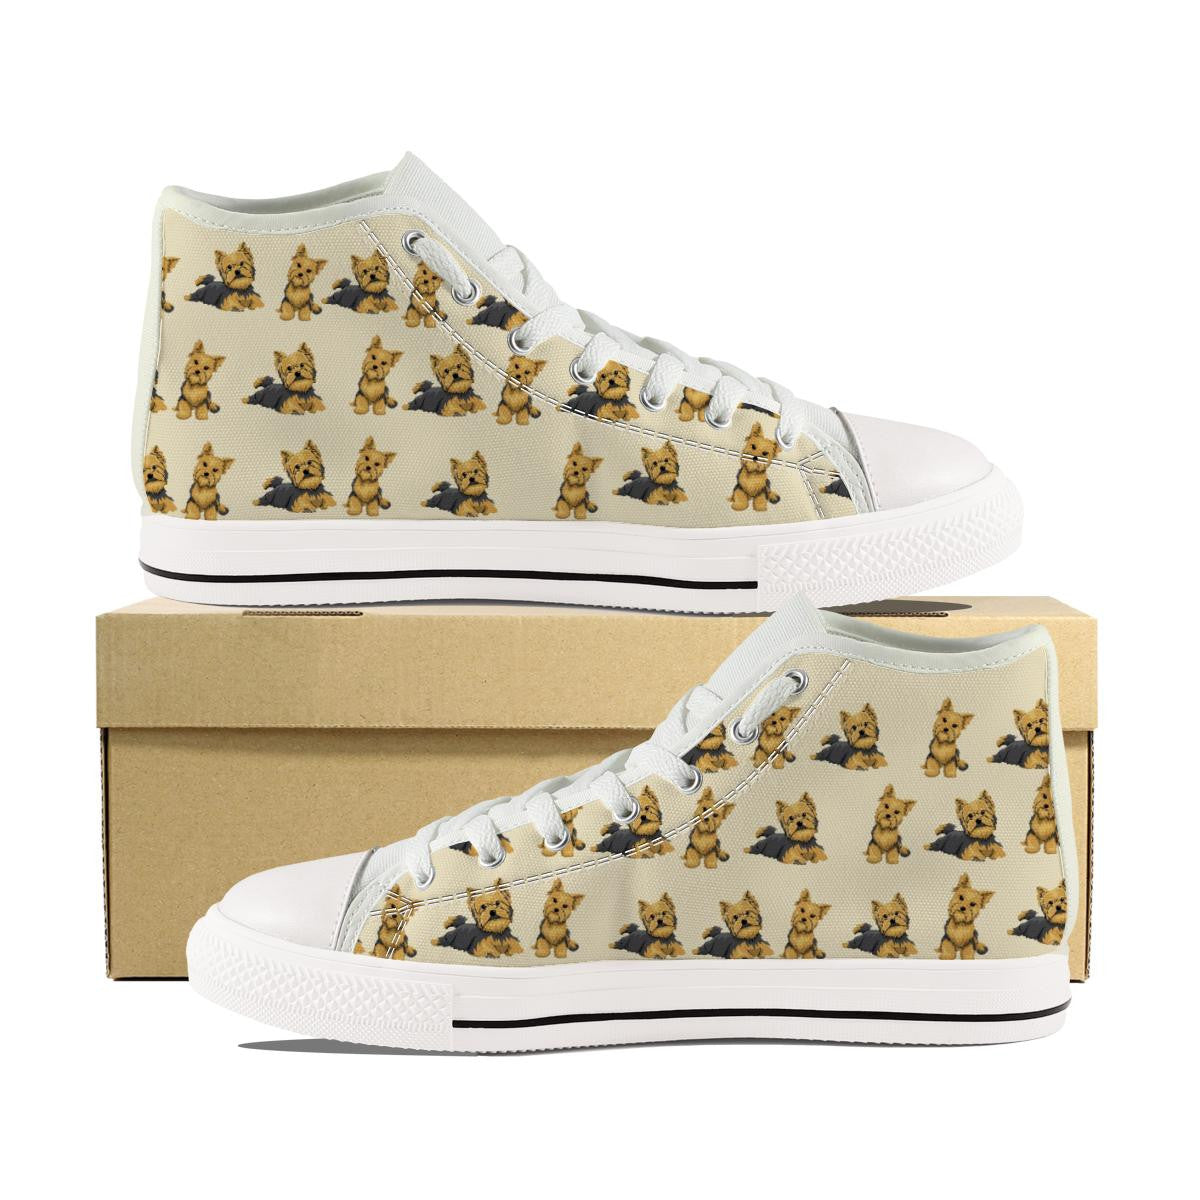 YORKIE KIDS CANVAS SHOES